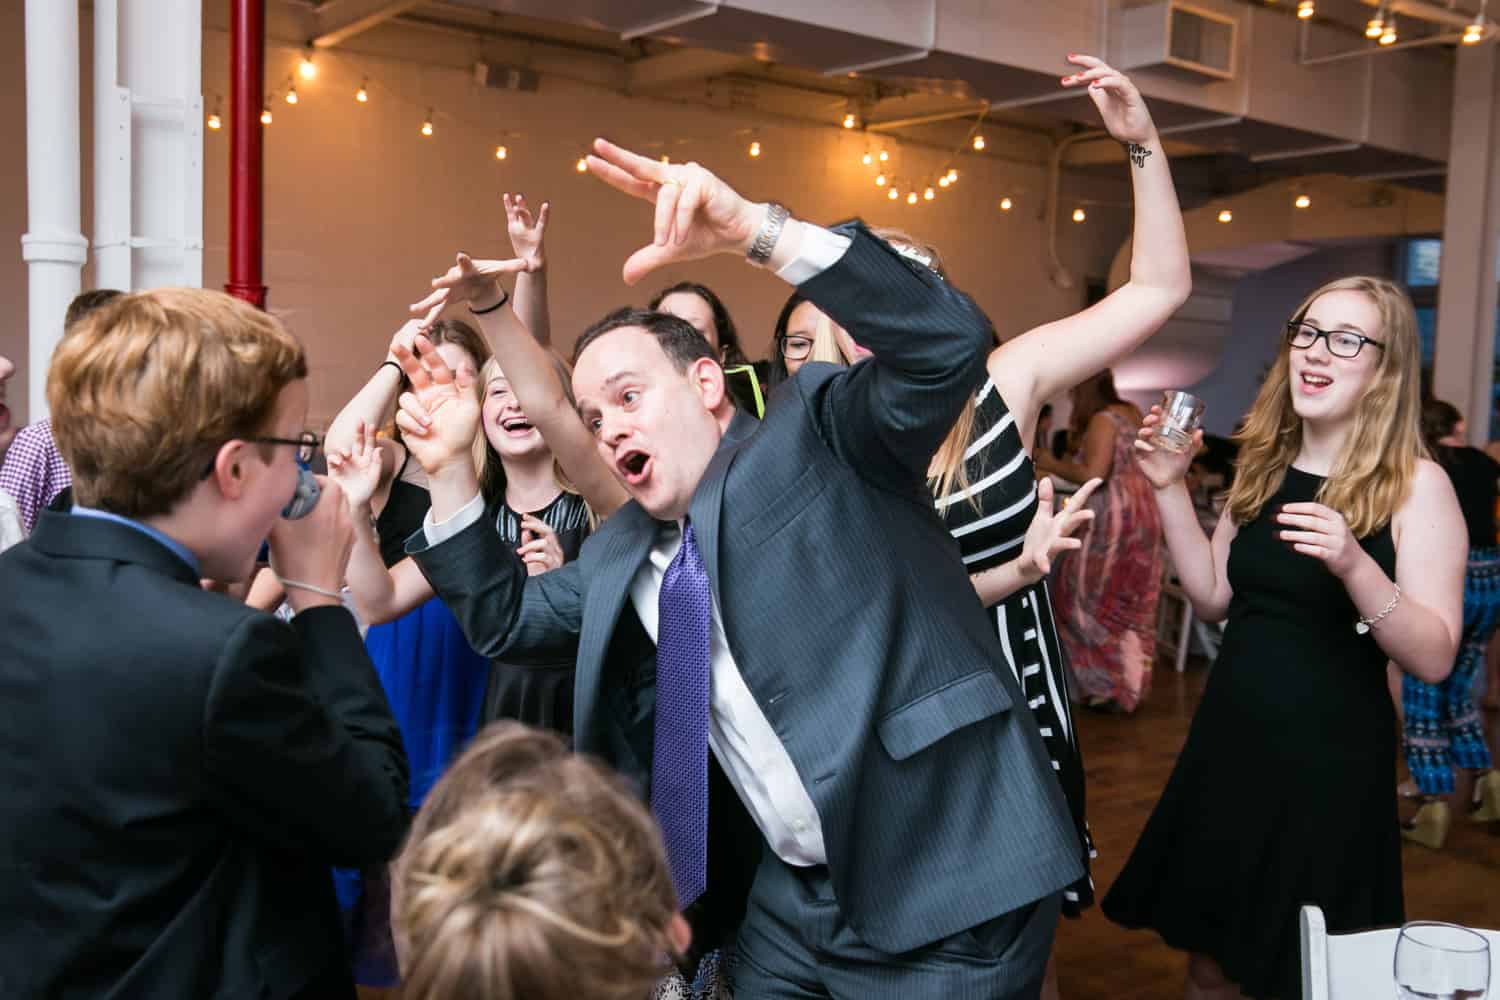 Guests dancing crazy in front of camera for an article on how to plan the perfect bar mitzvah